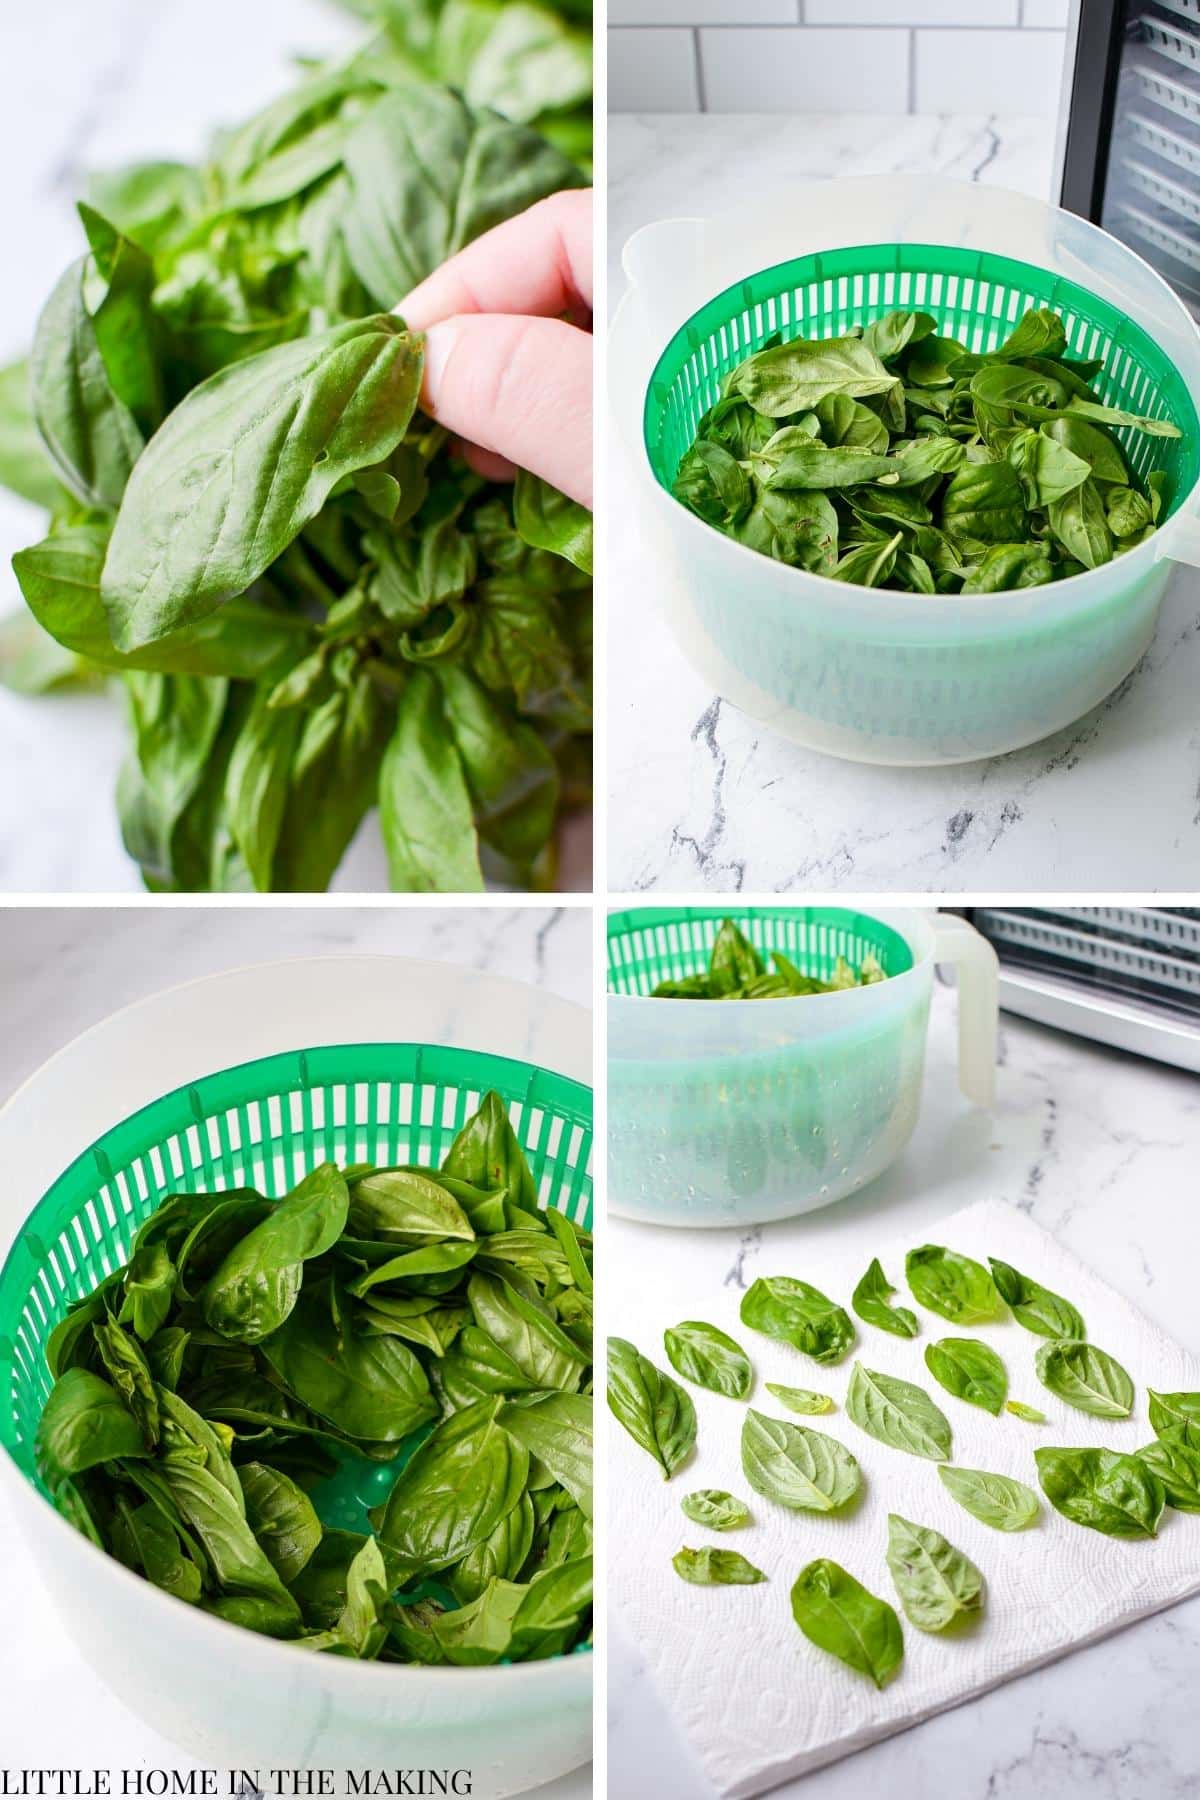 Cleaning basil in a salad spinner.